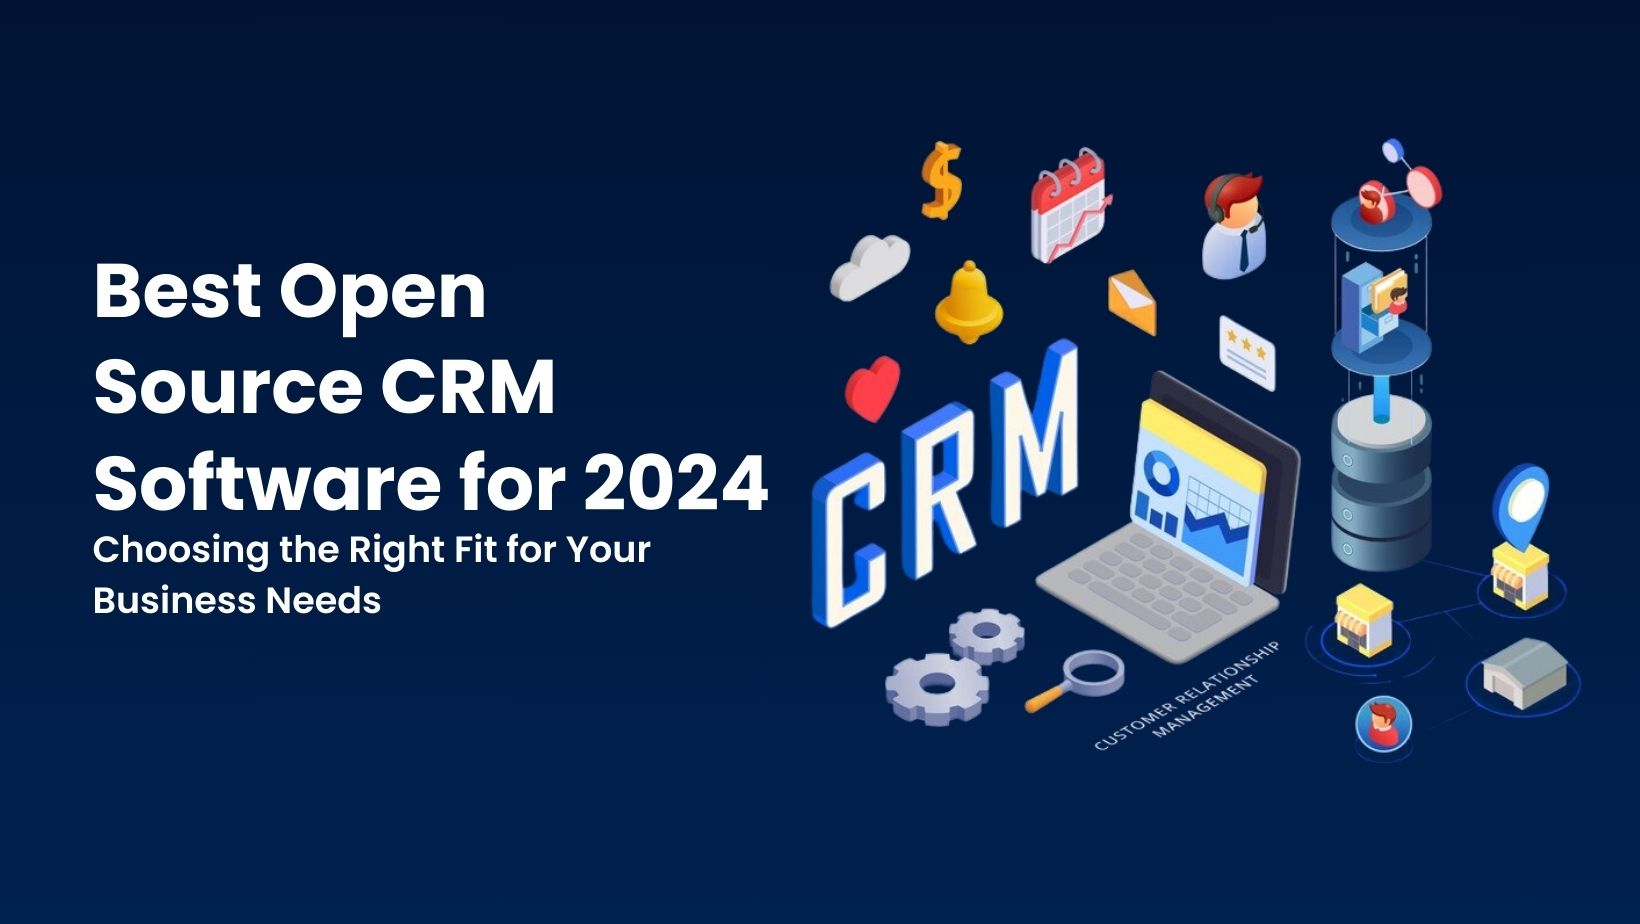 Best Open Source CRM Software for 2024